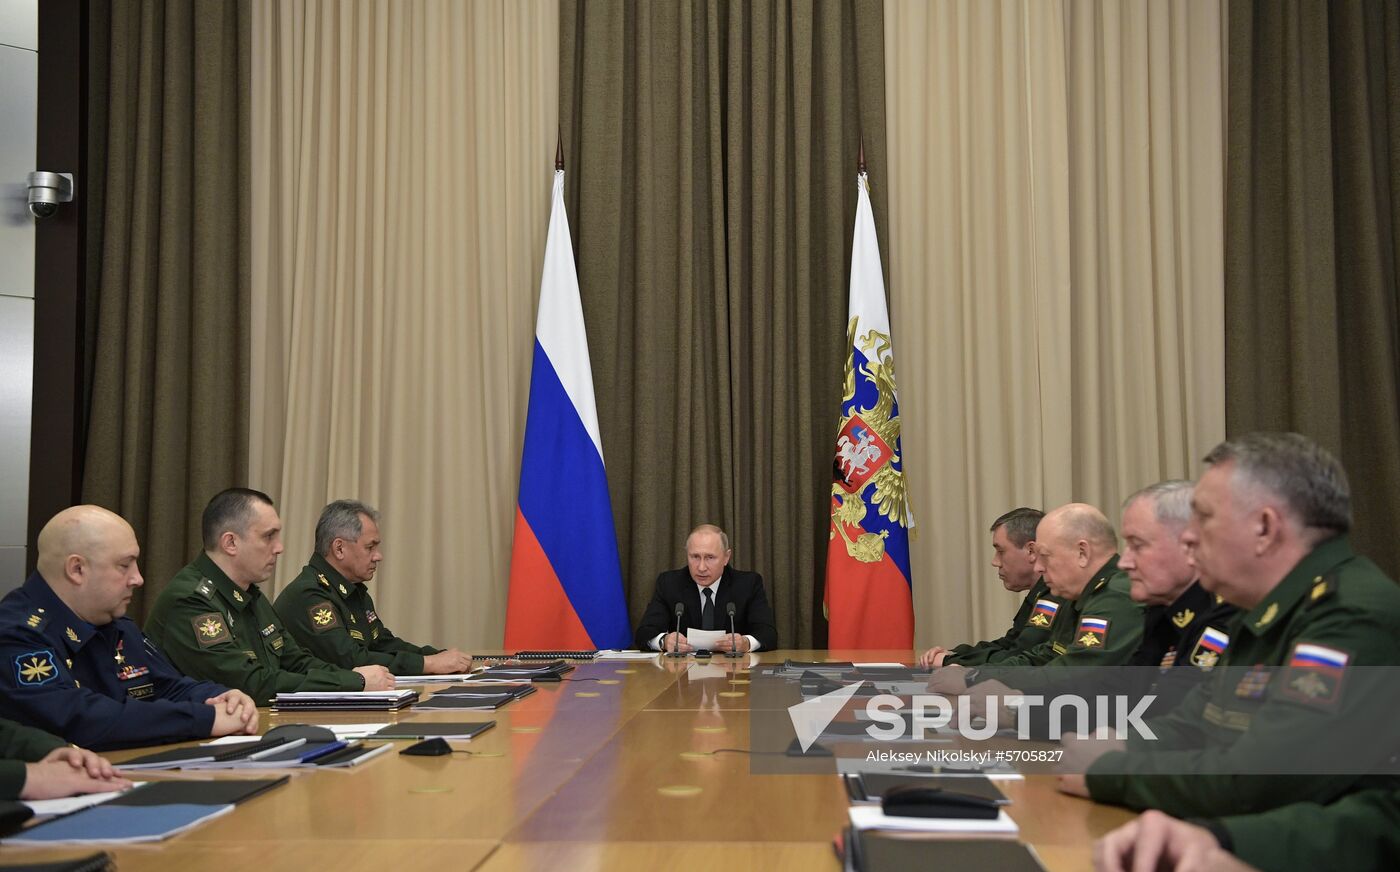 President Putin holds meeting with Russian Defense Ministry's top officials